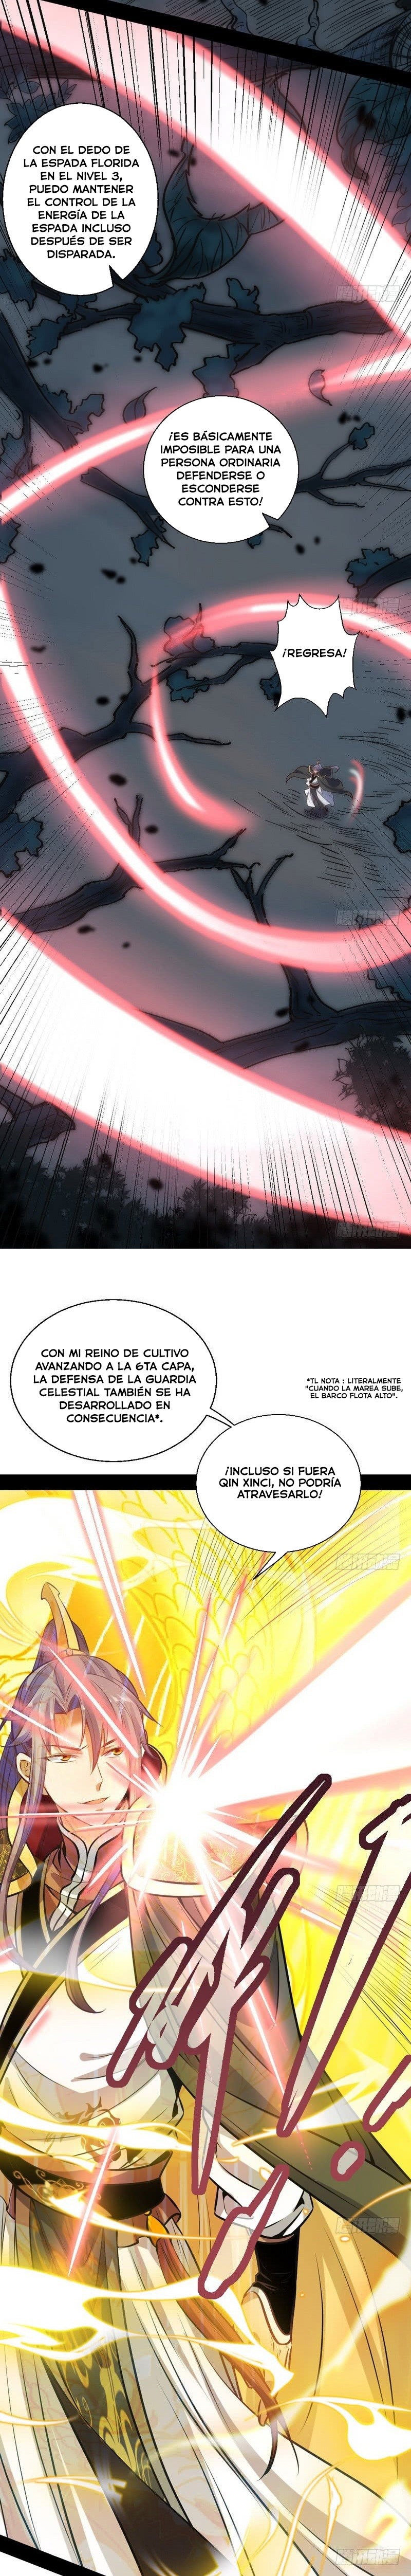 Manga Soy un dios maligno Chapter 30 image number 16